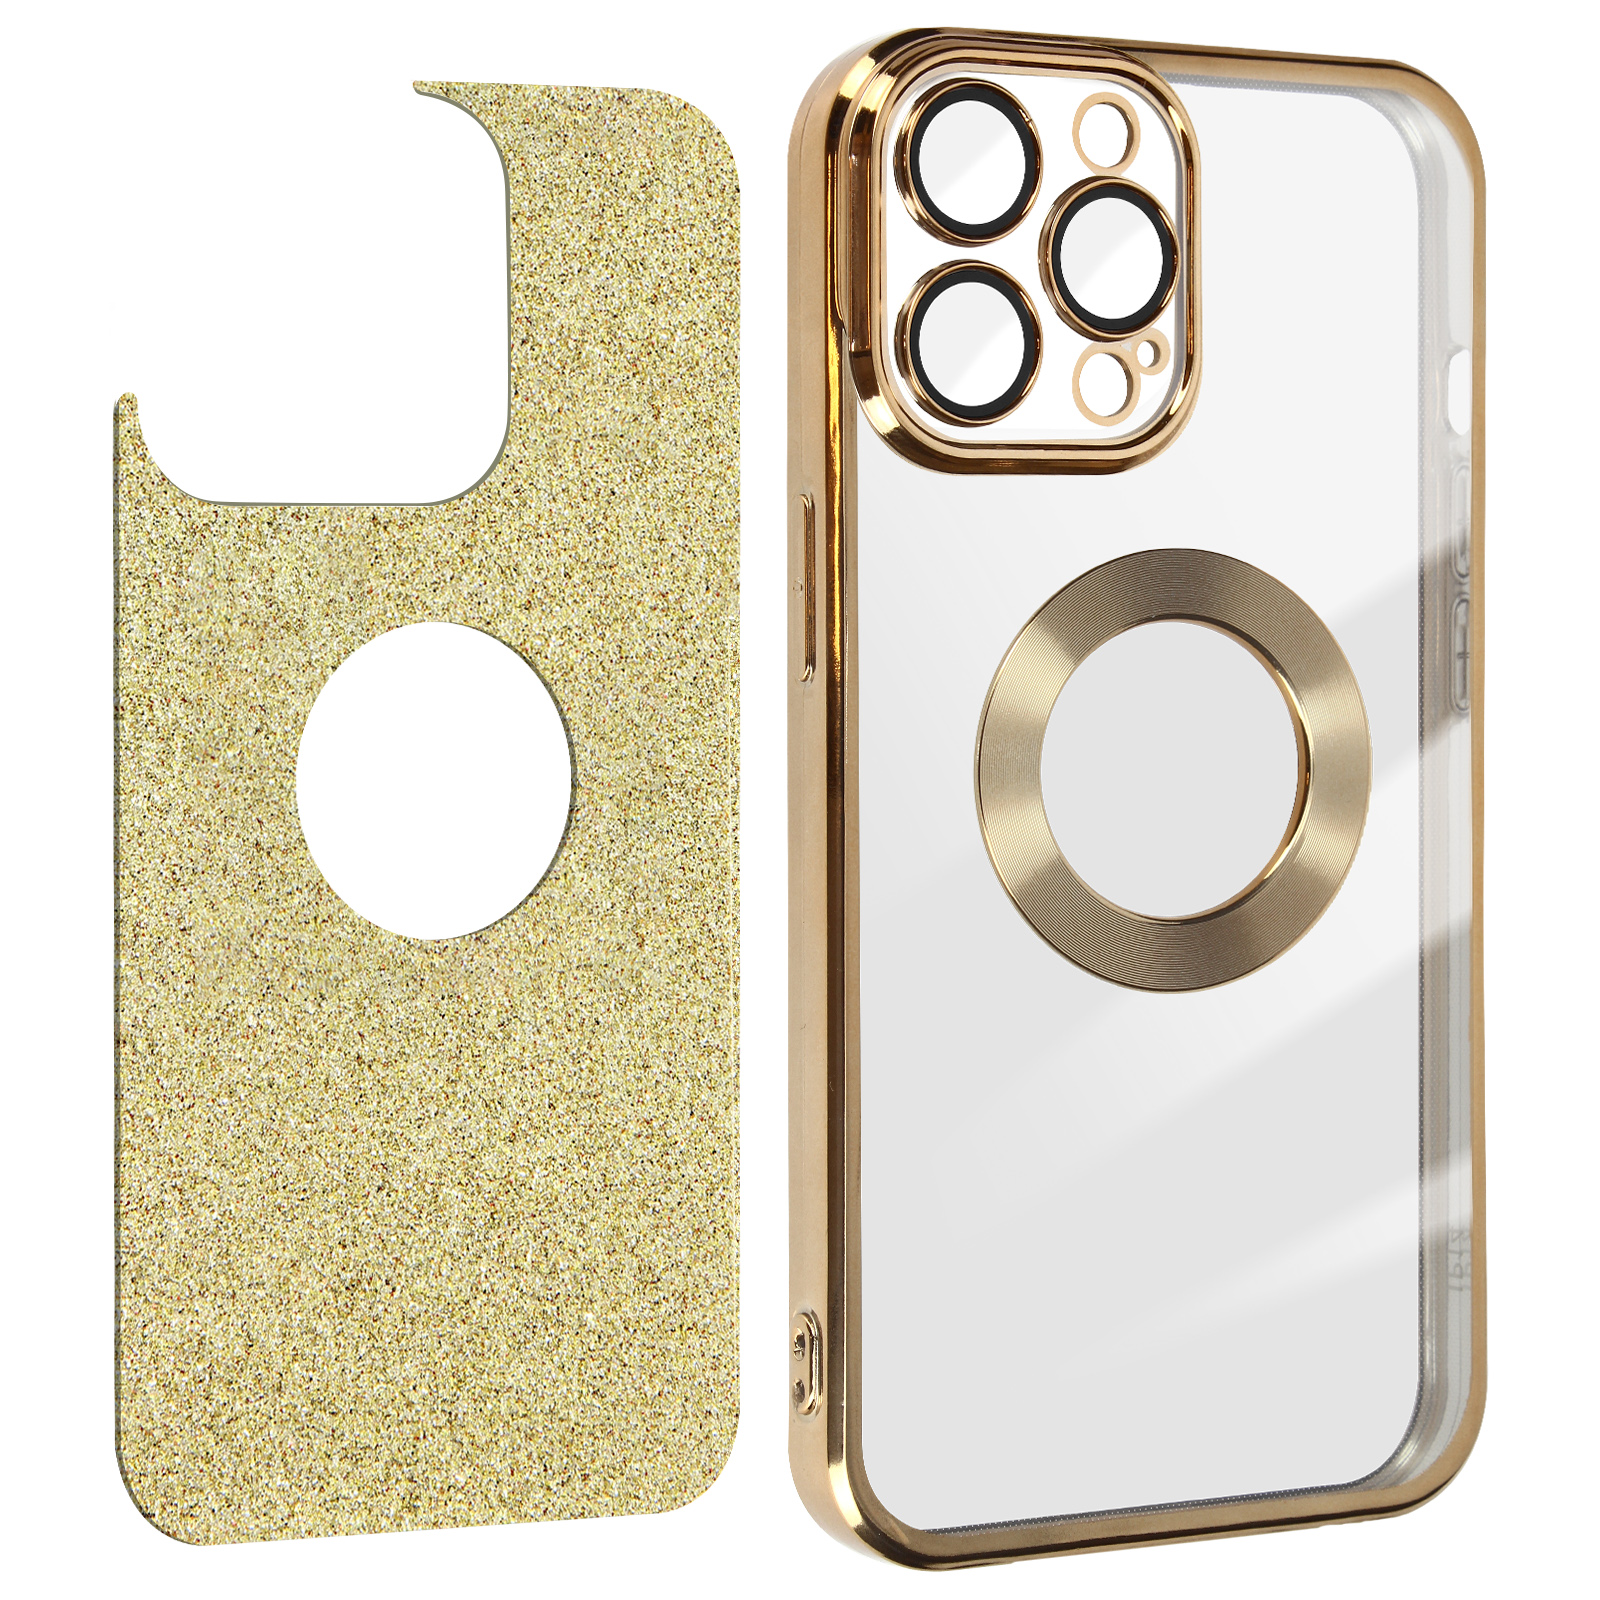 AVIZAR Protecam Spark Apple, Pro 13 Series, iPhone Max, Backcover, Gold